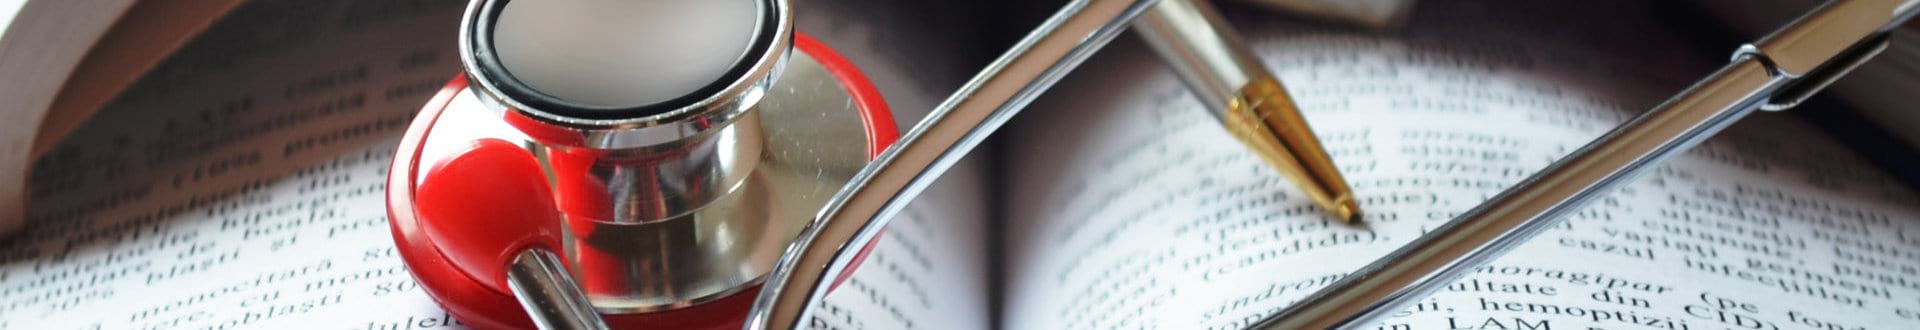 stethoscope on top of a book